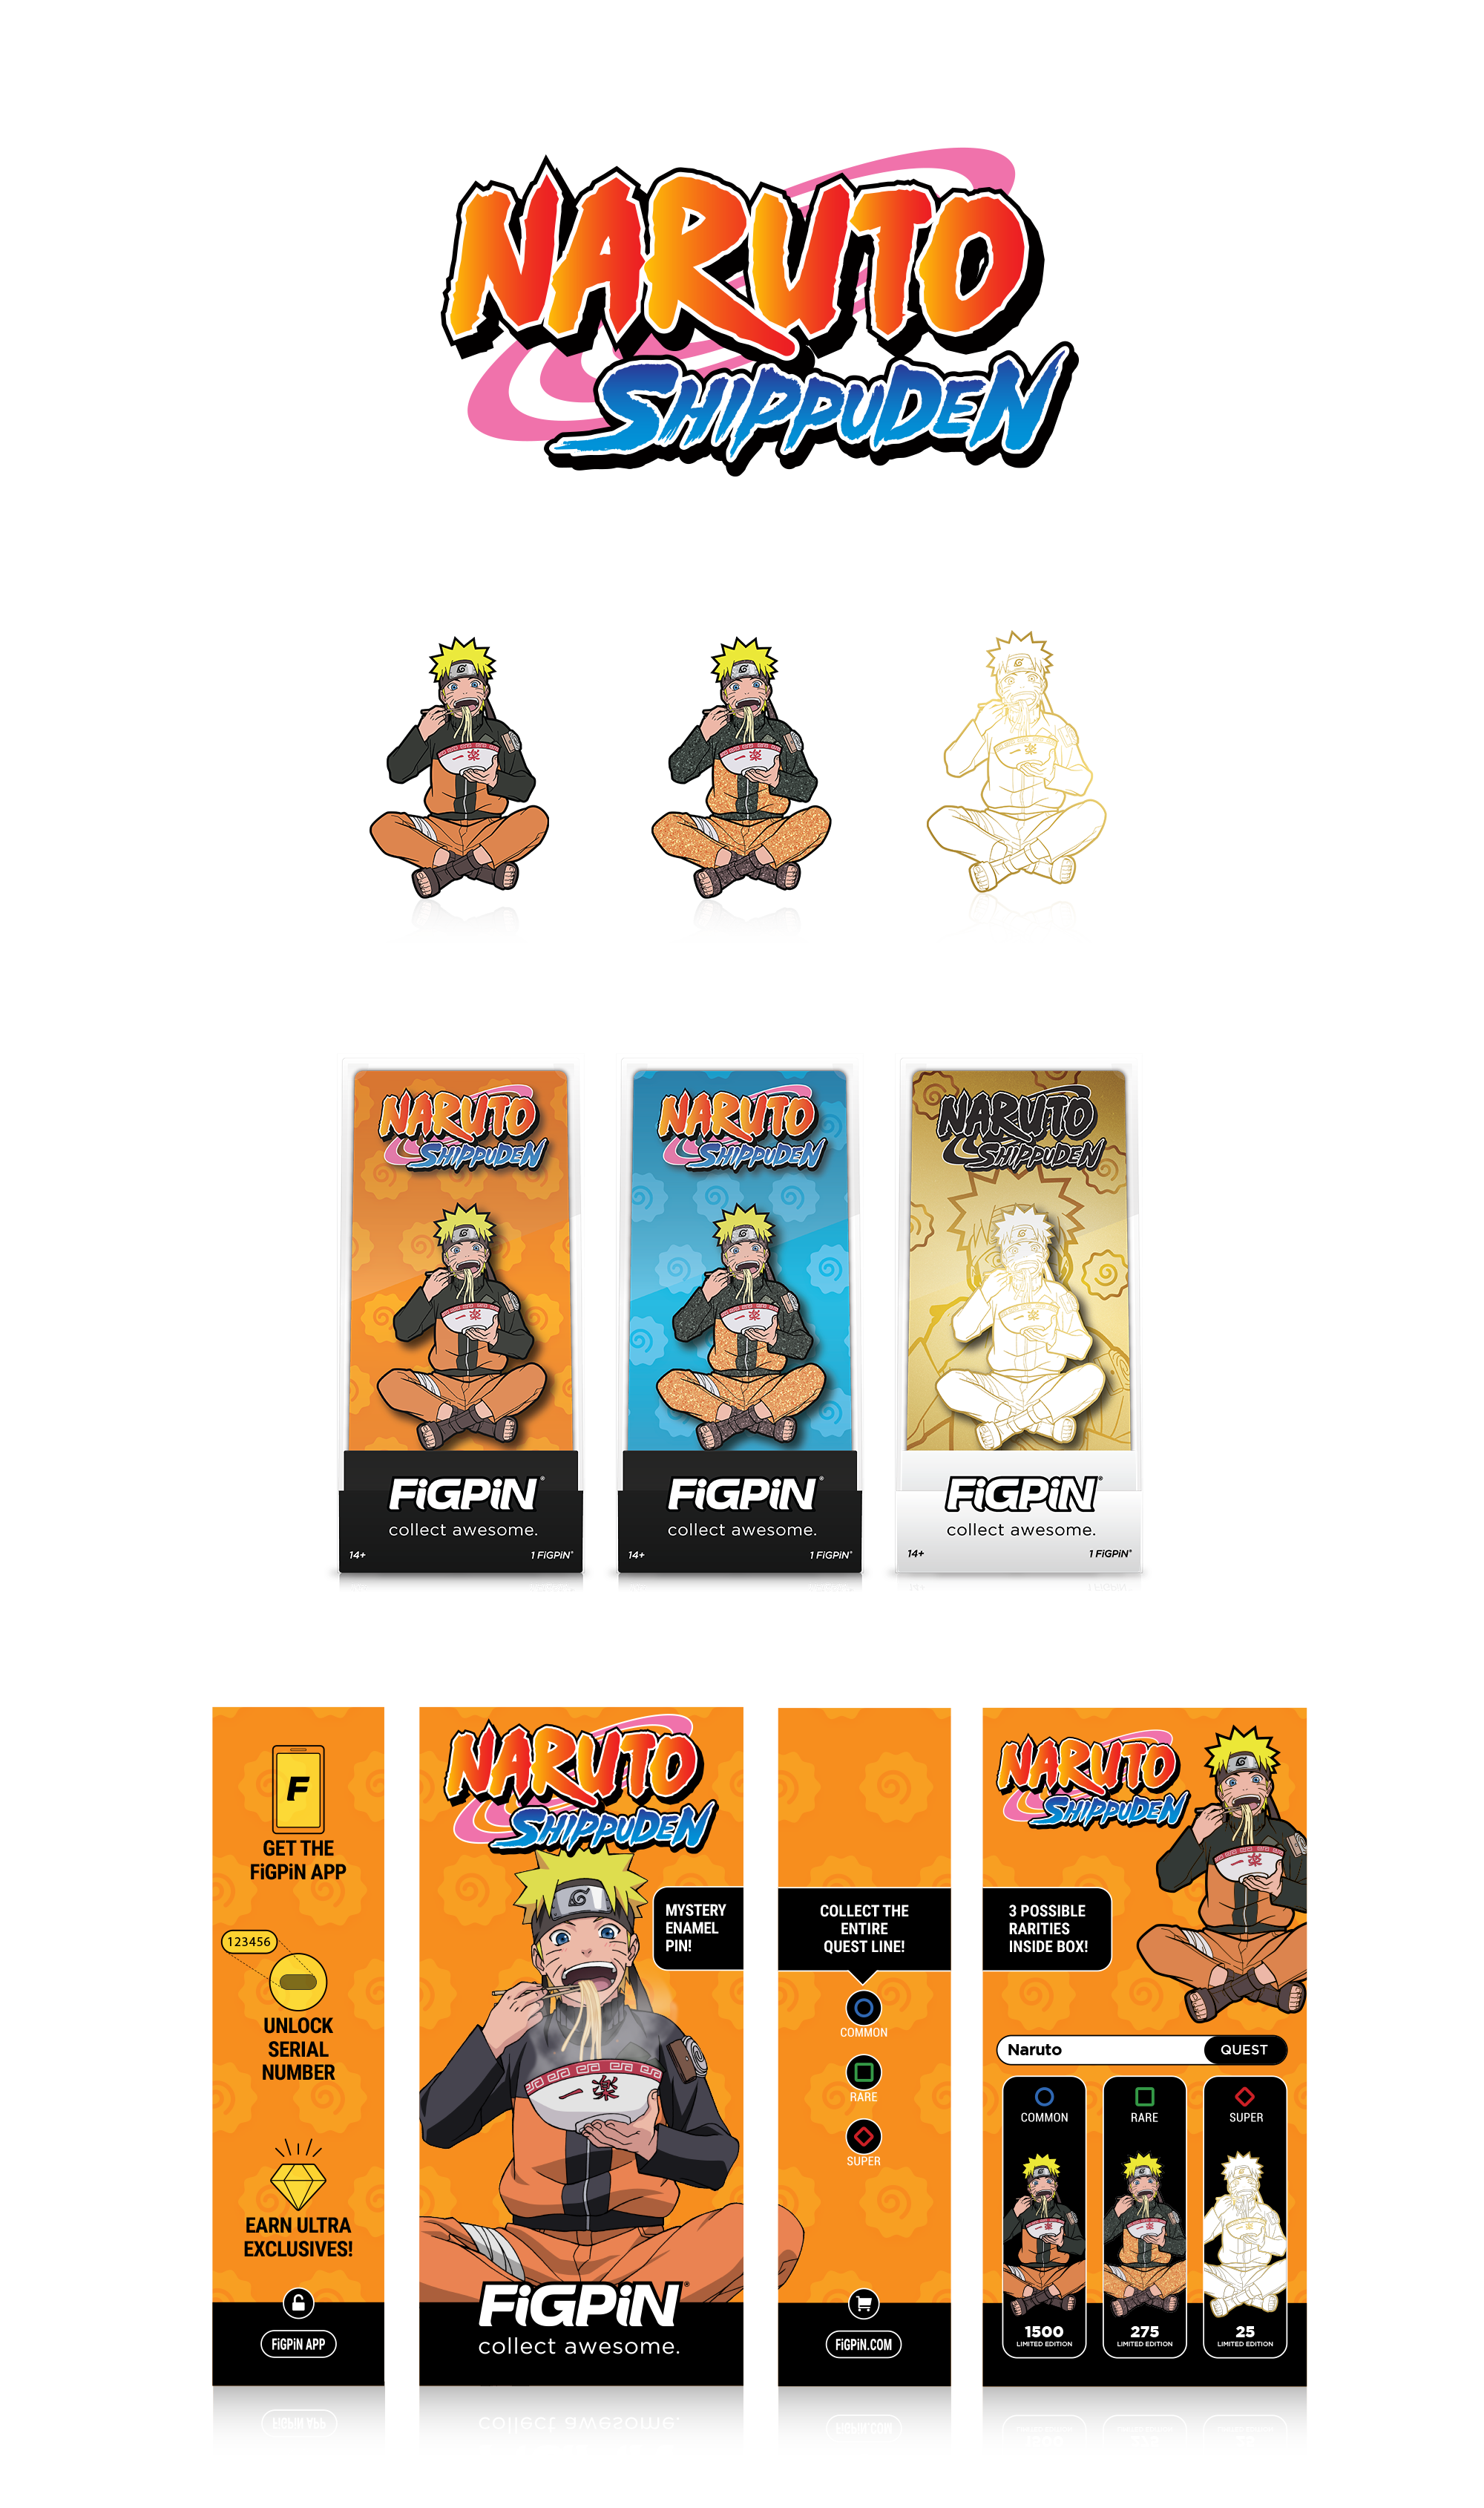 Art Render of Naruto Shippuden's FiGPiN quest, featuring Naruto Uzumaki in three variants and the outside designs of the display cases and the exterior mystery box packaging